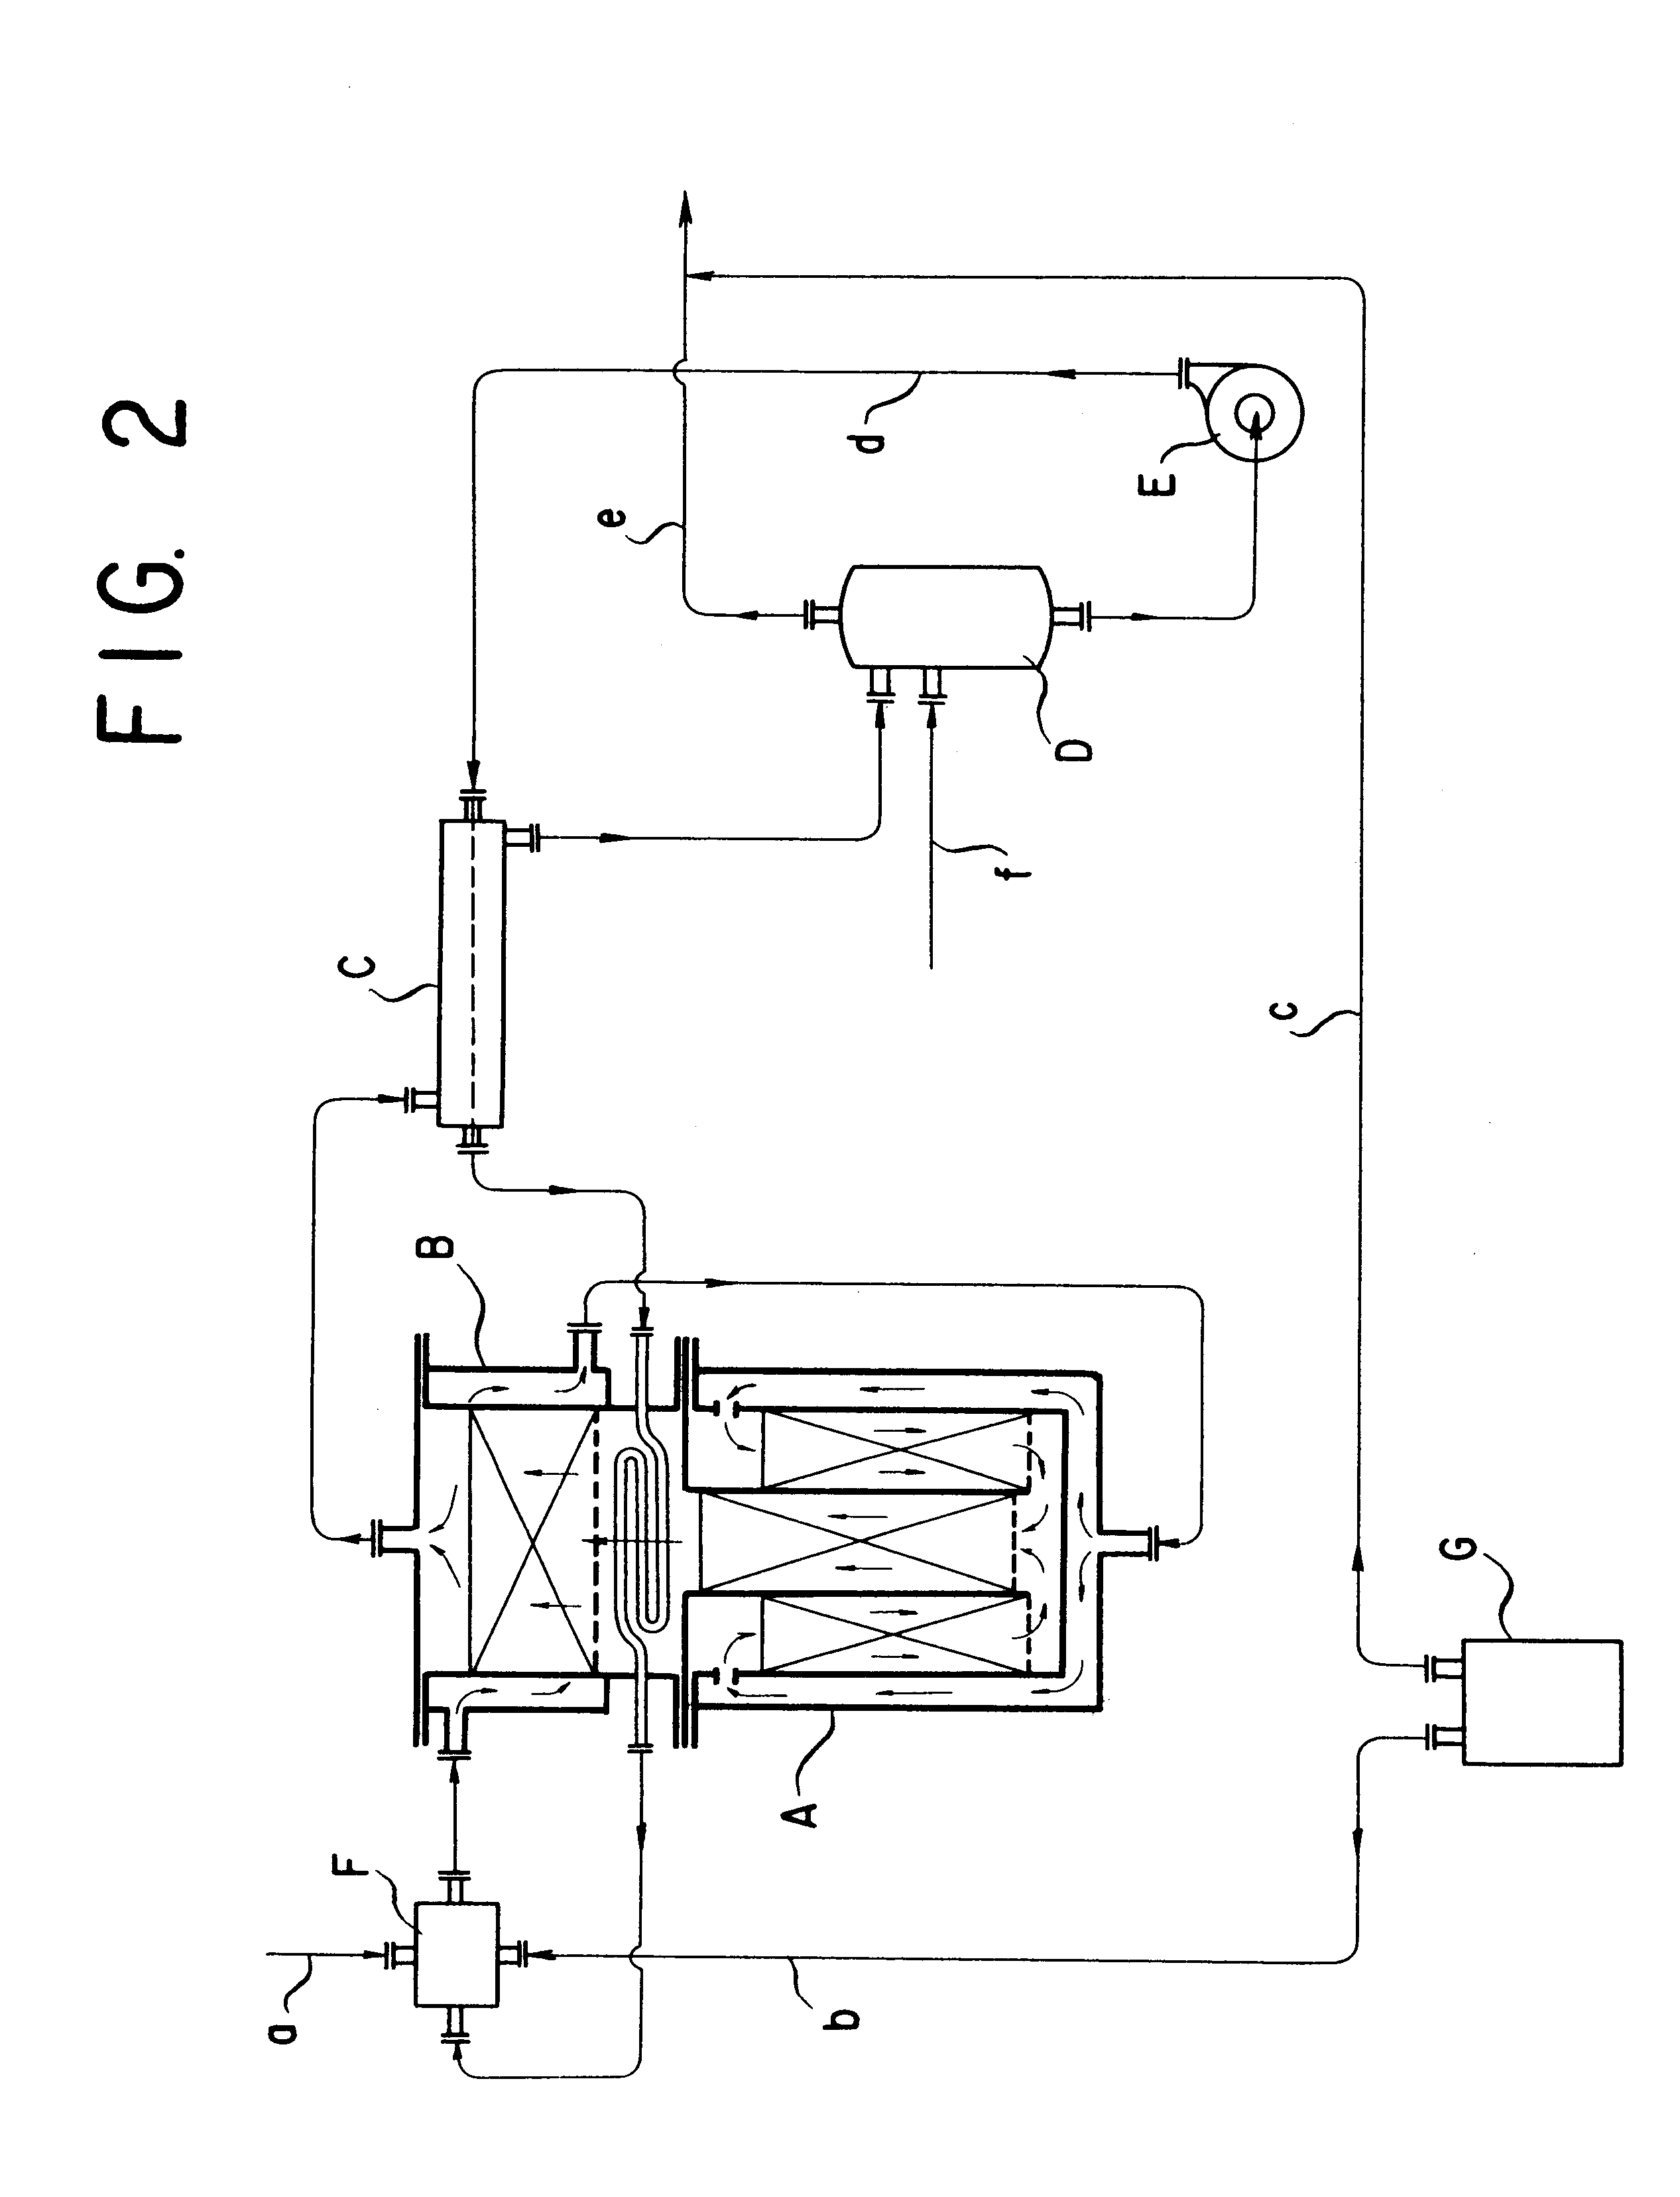 Auto-oxidation and internal heating type reforming method and apparatus for hydrogen production